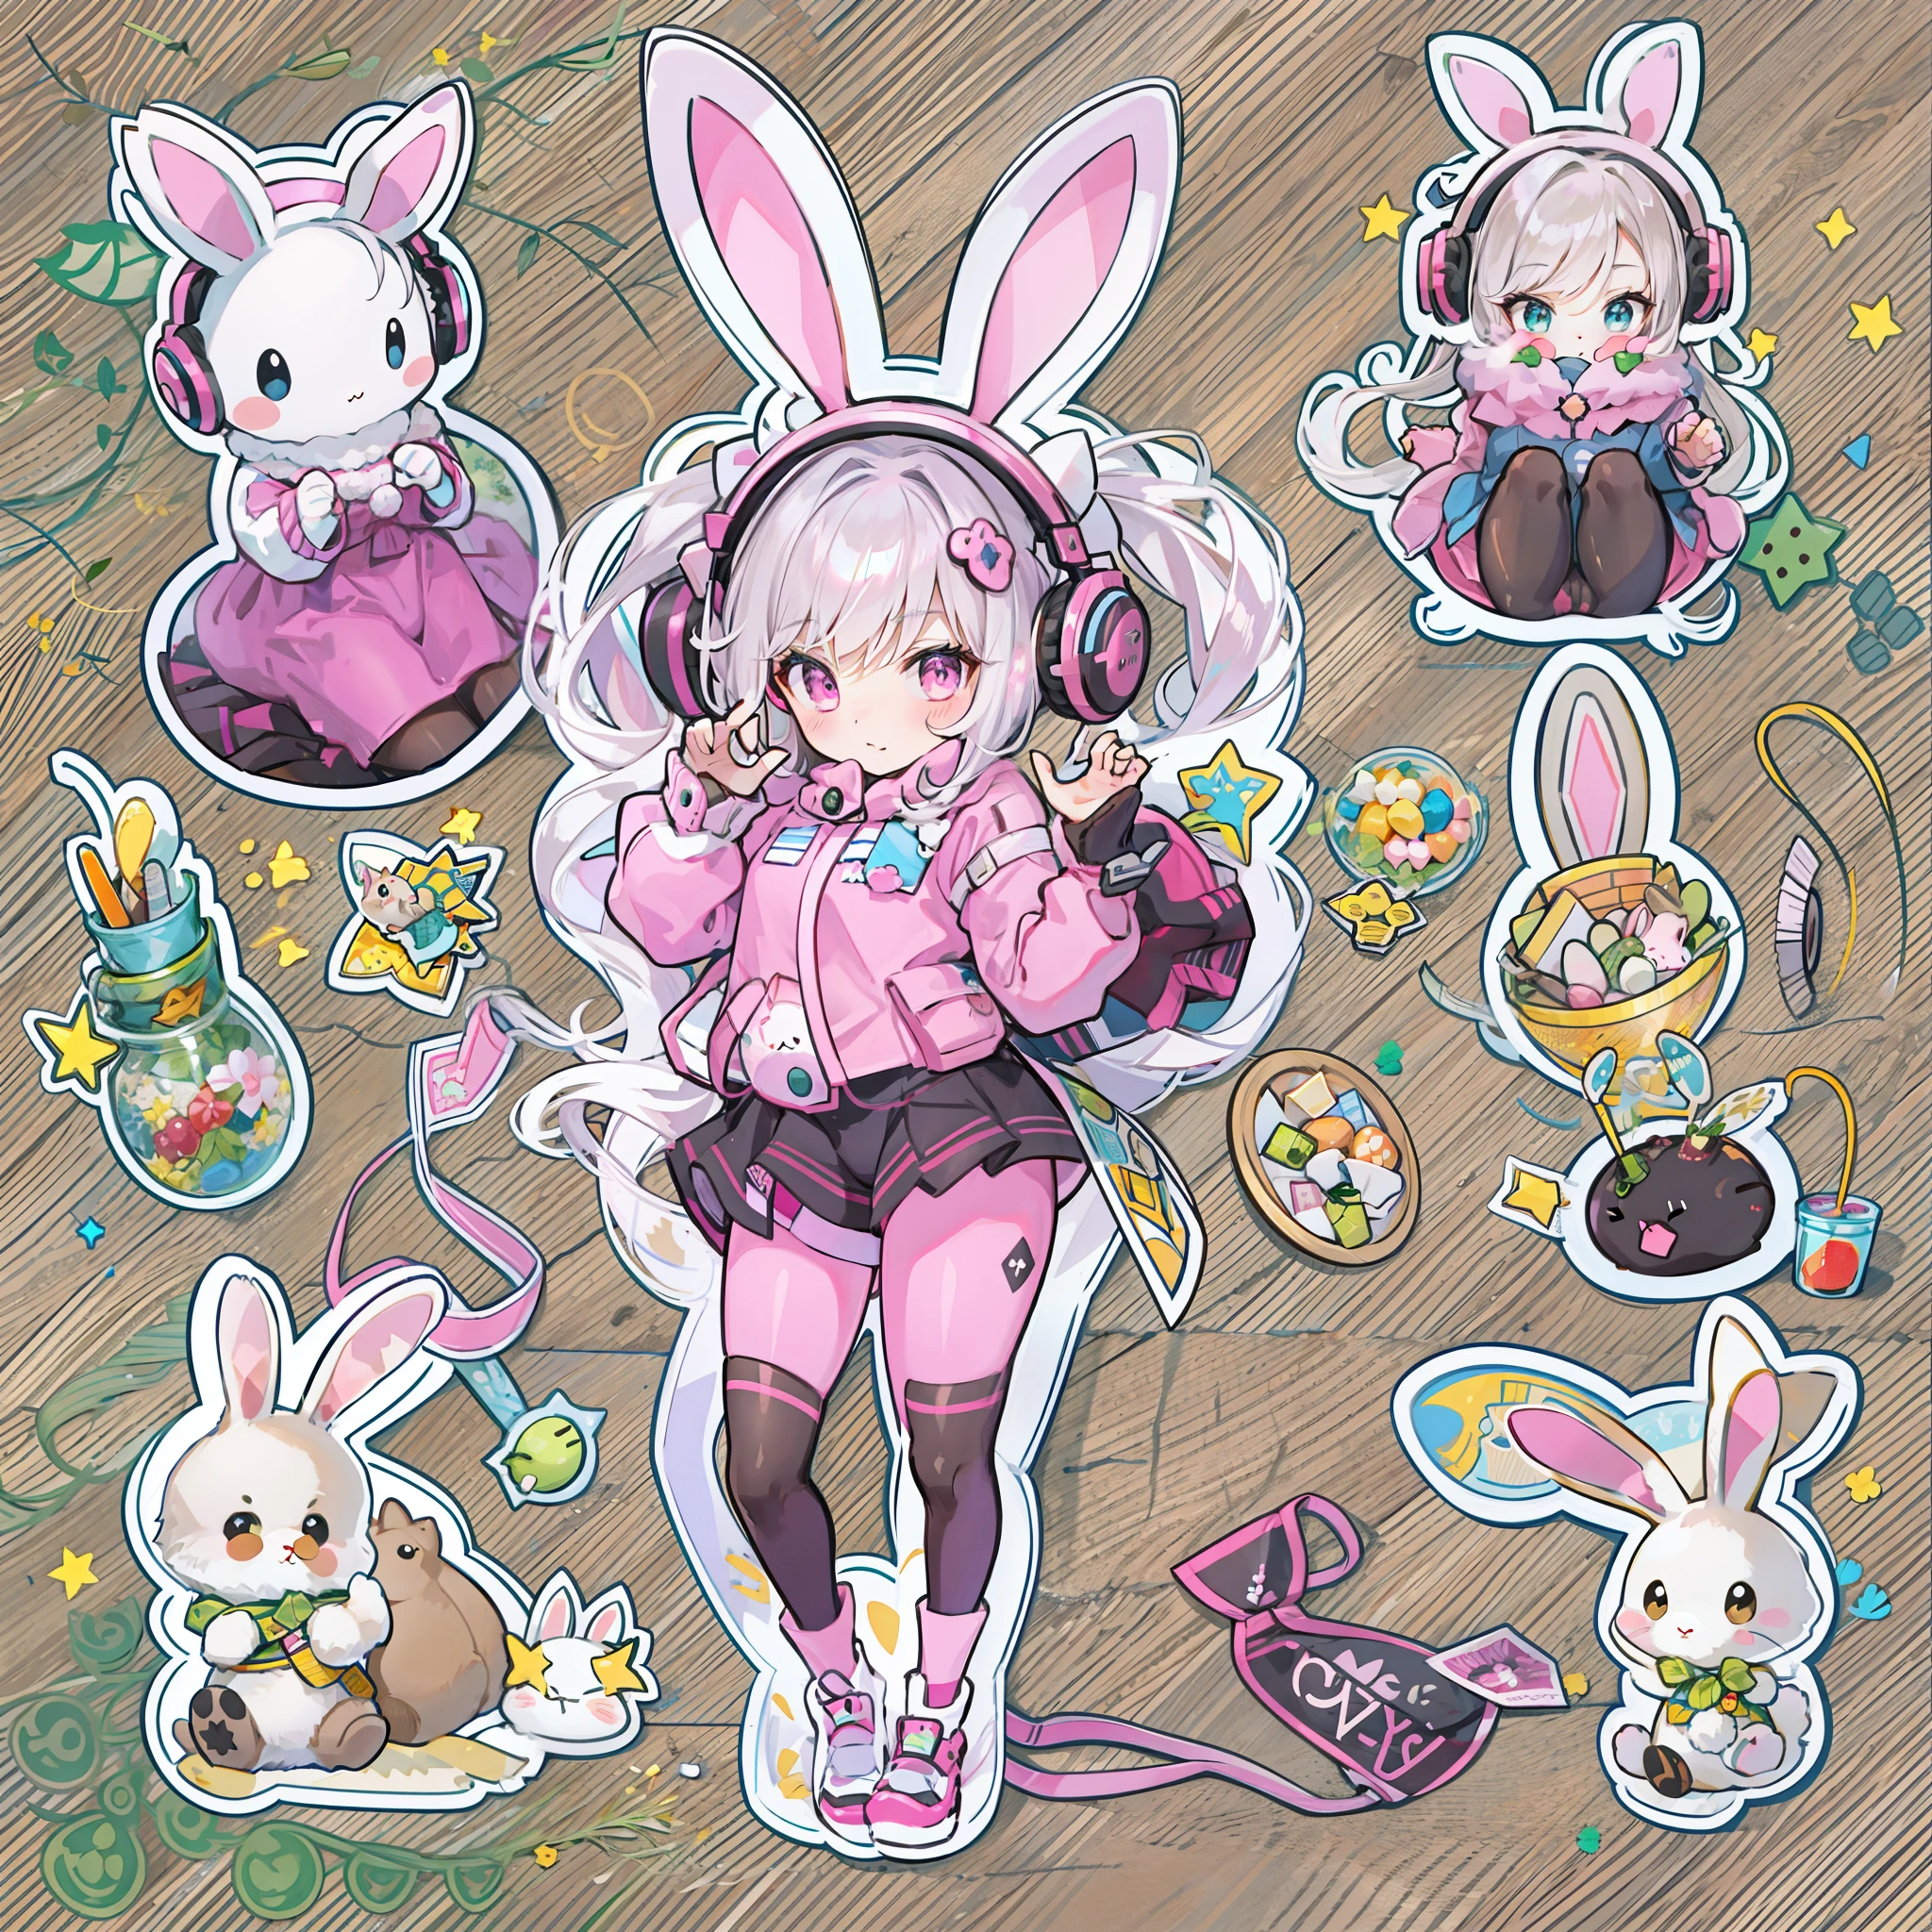 sticker illustration, alice \(nikke\), pink bodysuit animal ear headphones shiny clothes twintails latex bodysuit,bunny pose,cute decoration with bunny items,